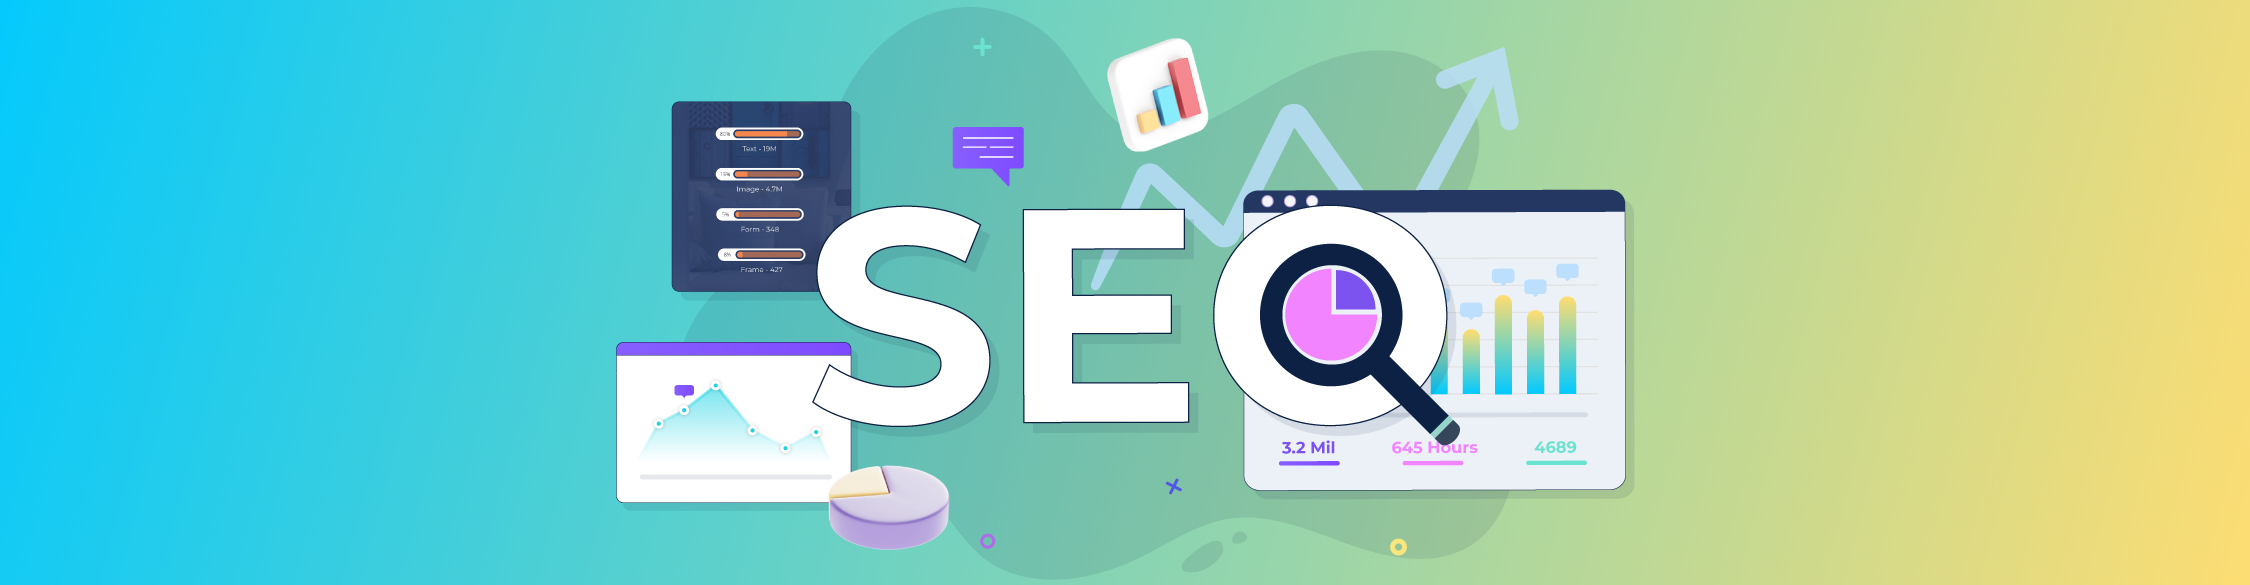 SEO Services That Will Skyrocket Your Business in Maryland: